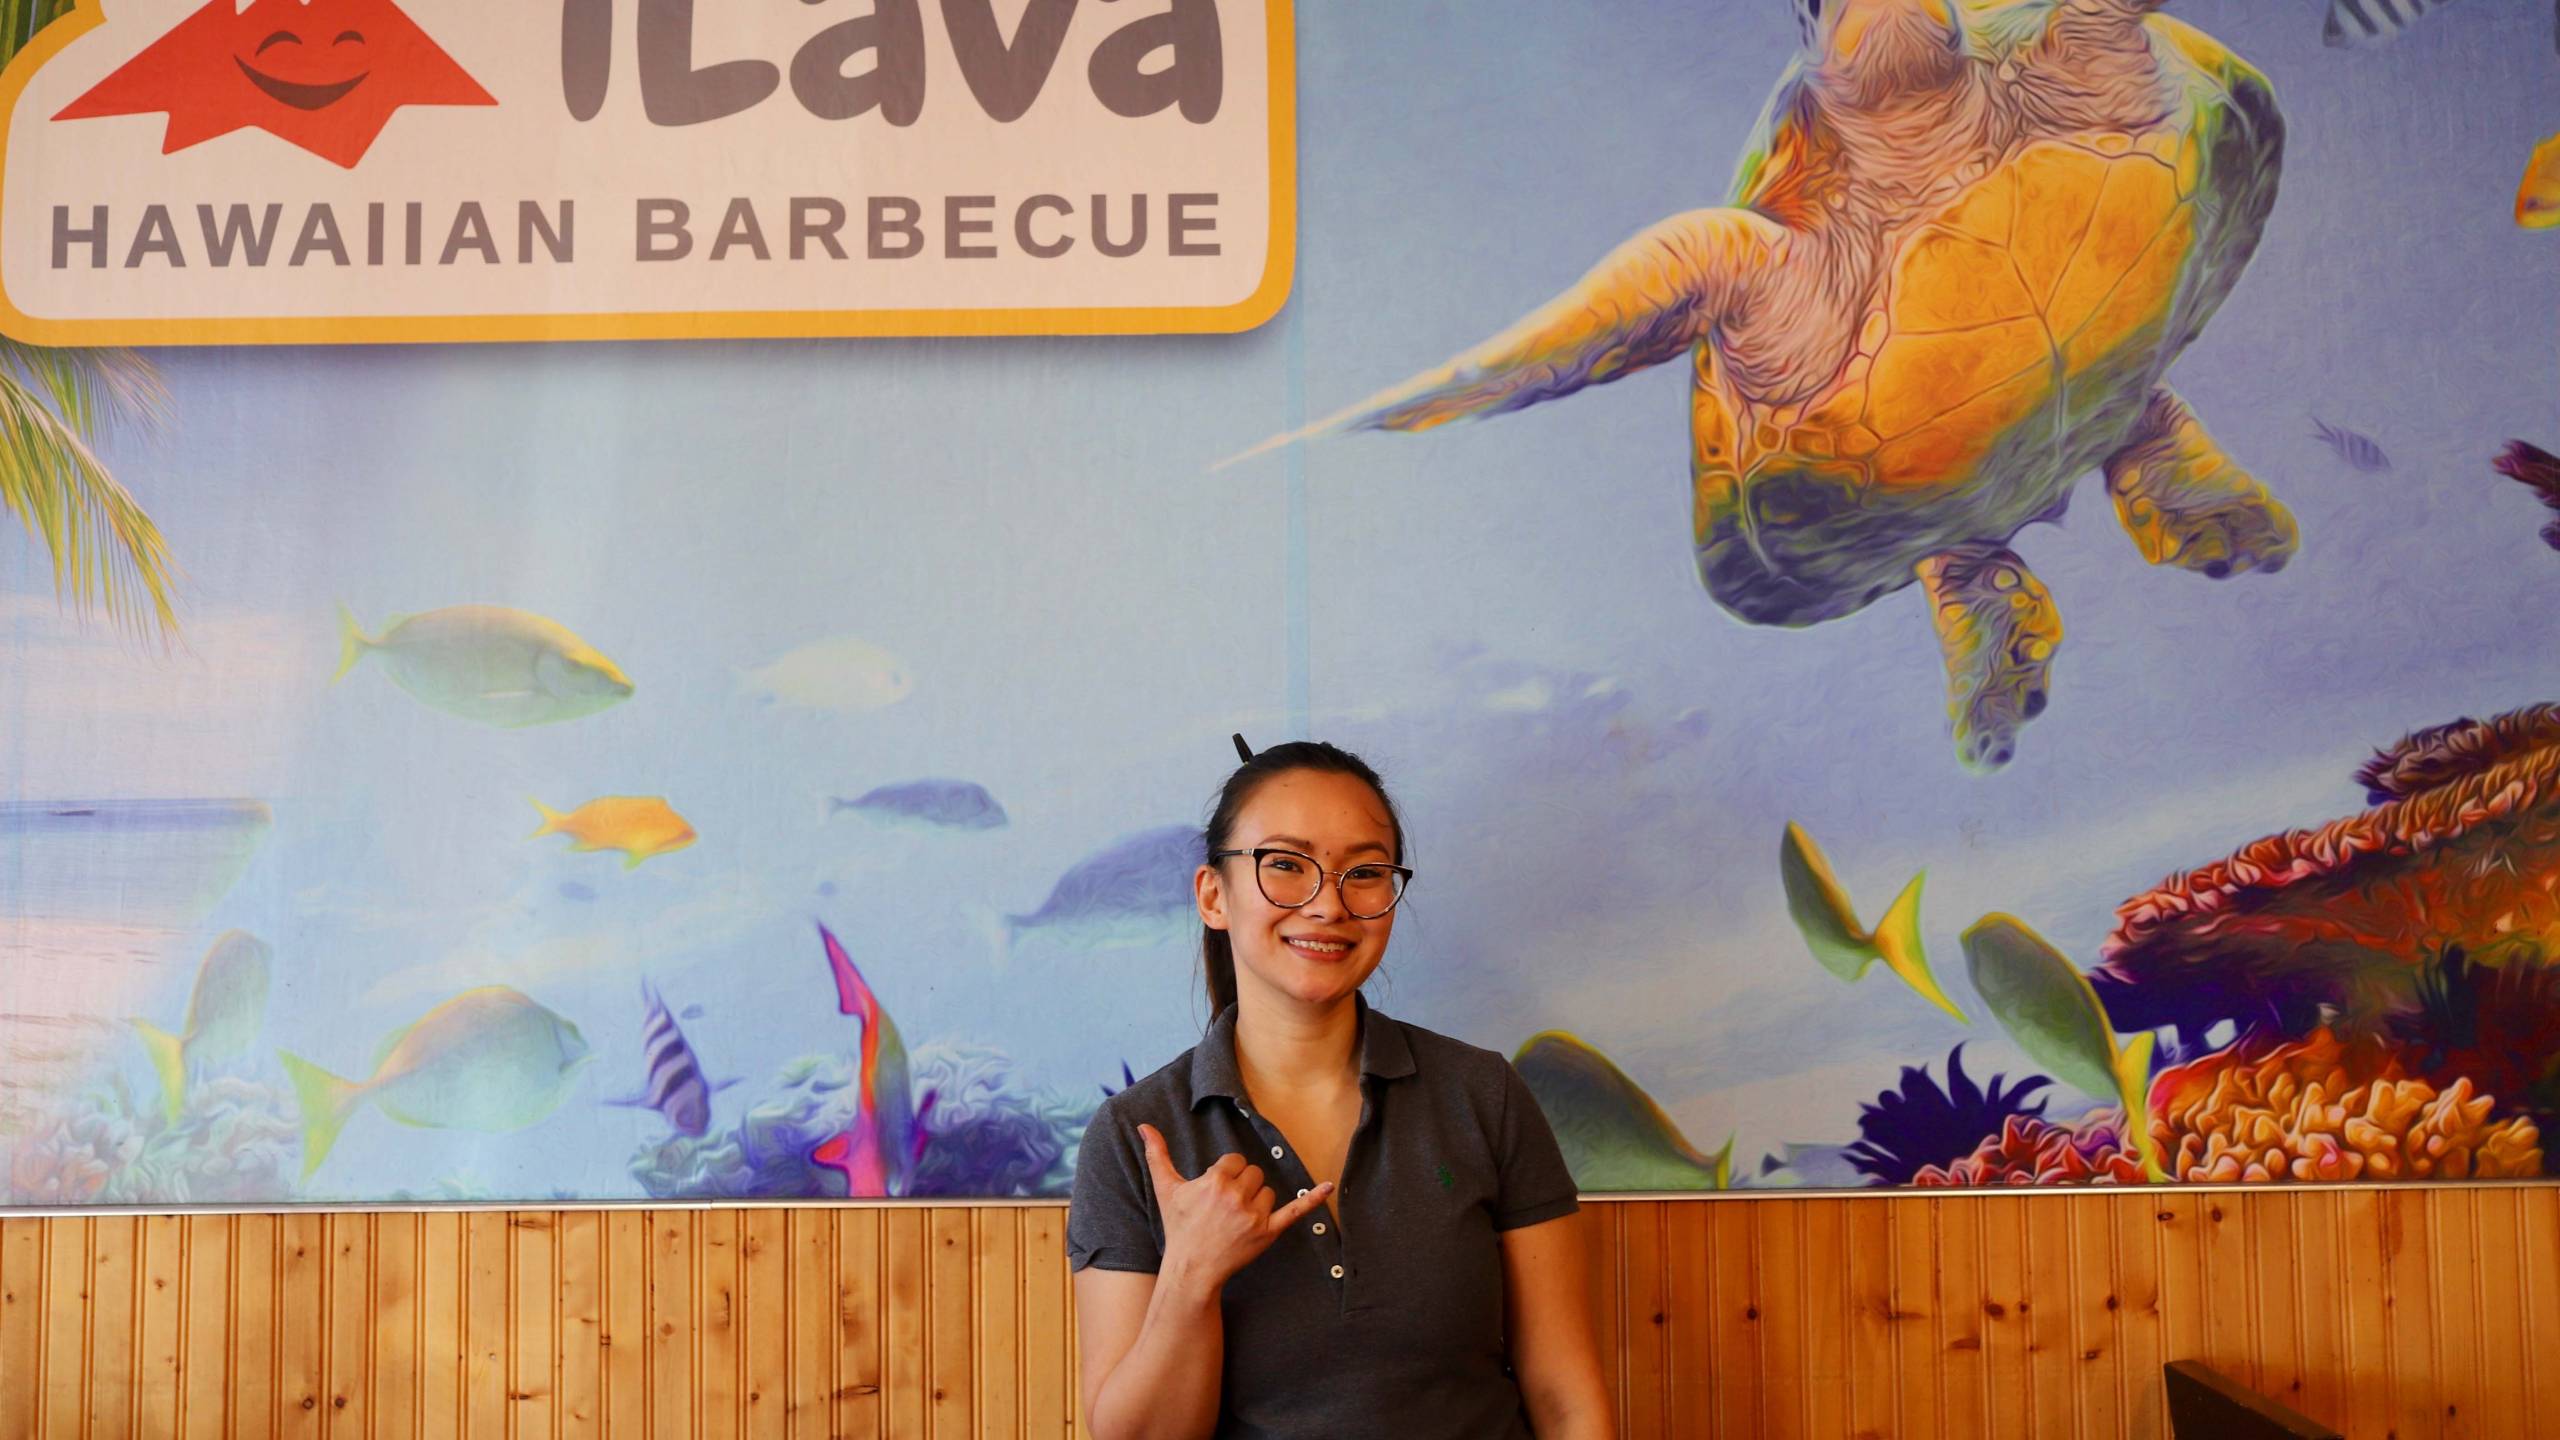 iLava Hawaiian Barbecue owner Nicolle Jacinto makes a "hang loose" hand gesture in front of an ocean mural inside her East Oakland restaurant.